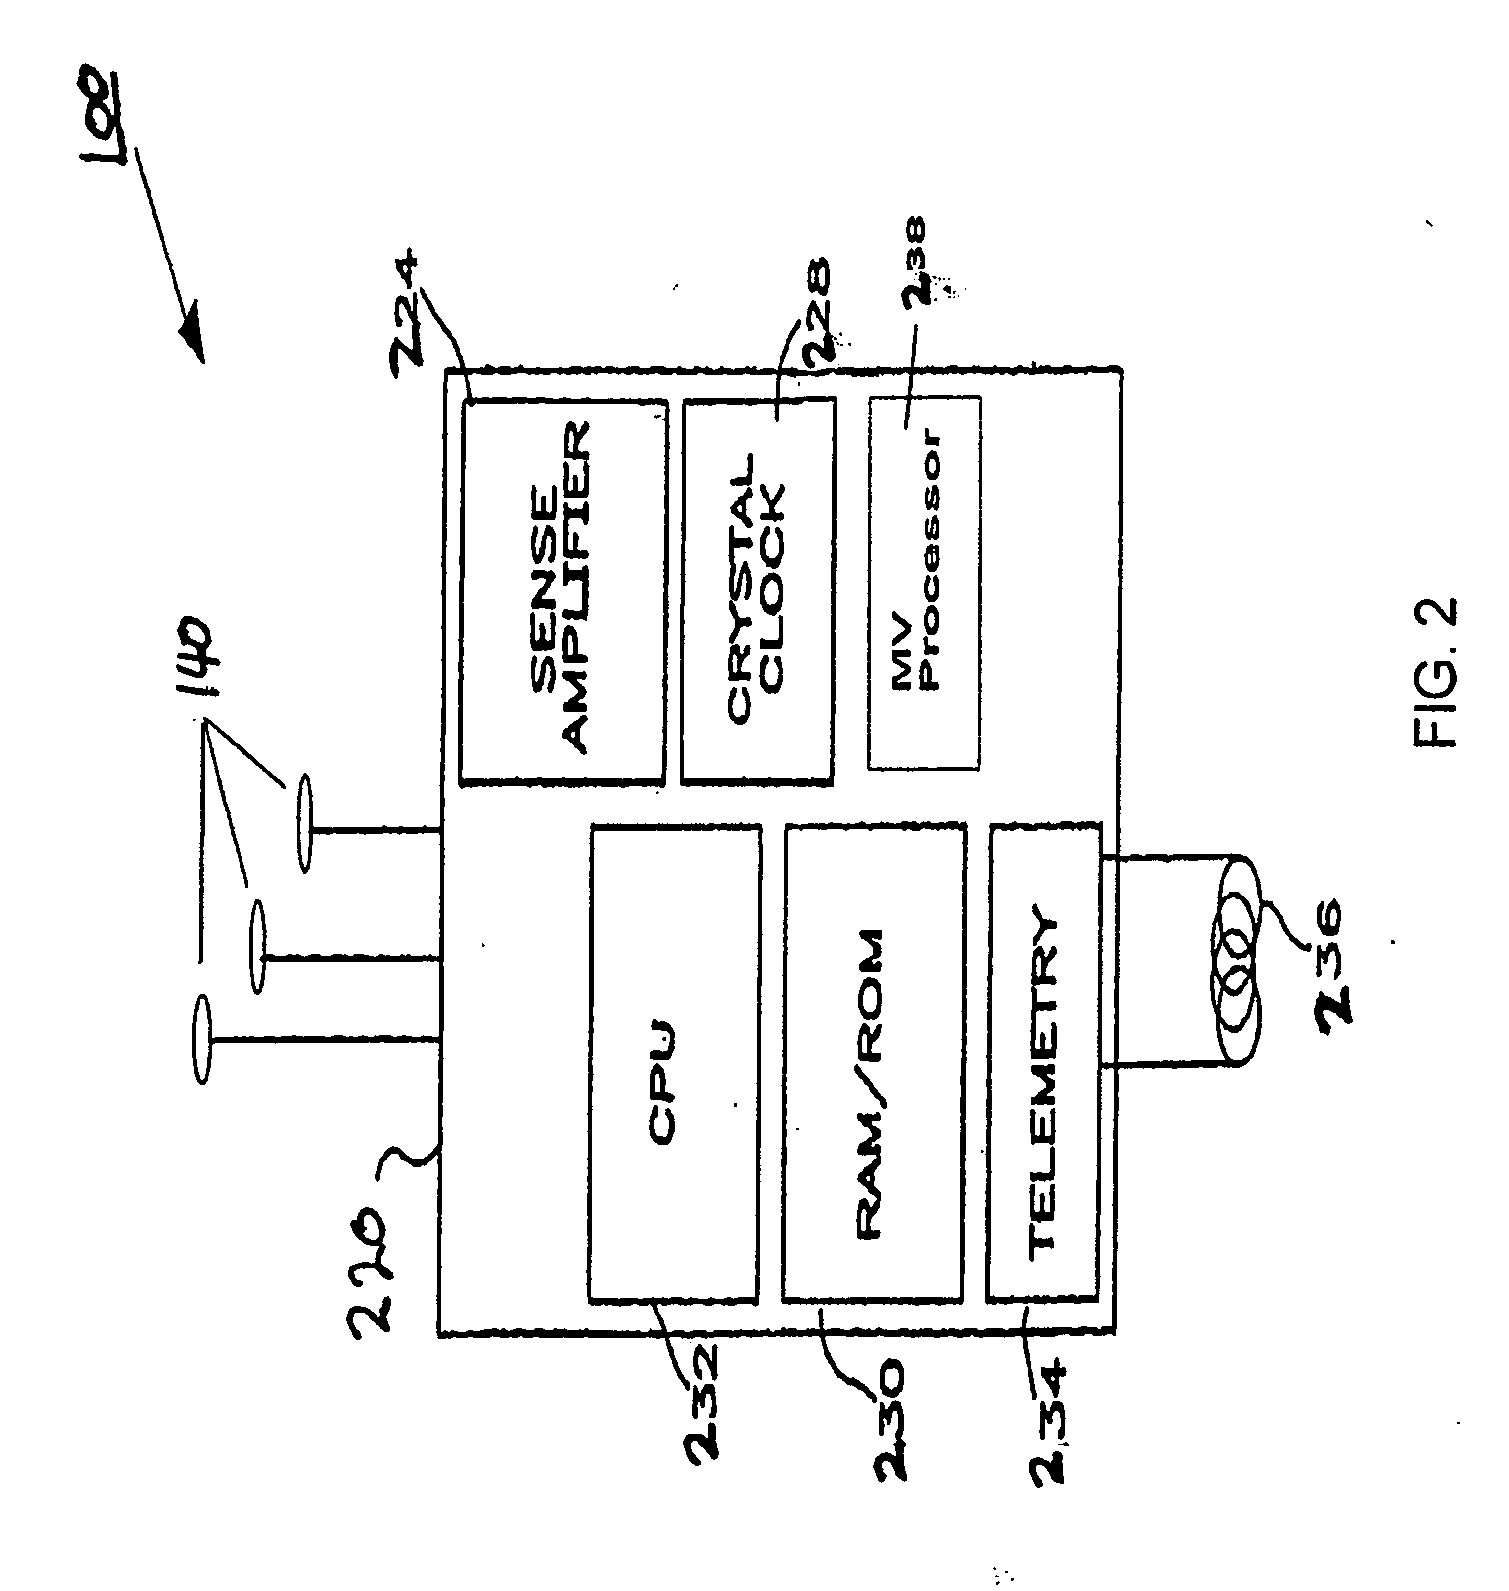 Methods for data retention in an implantable medical device